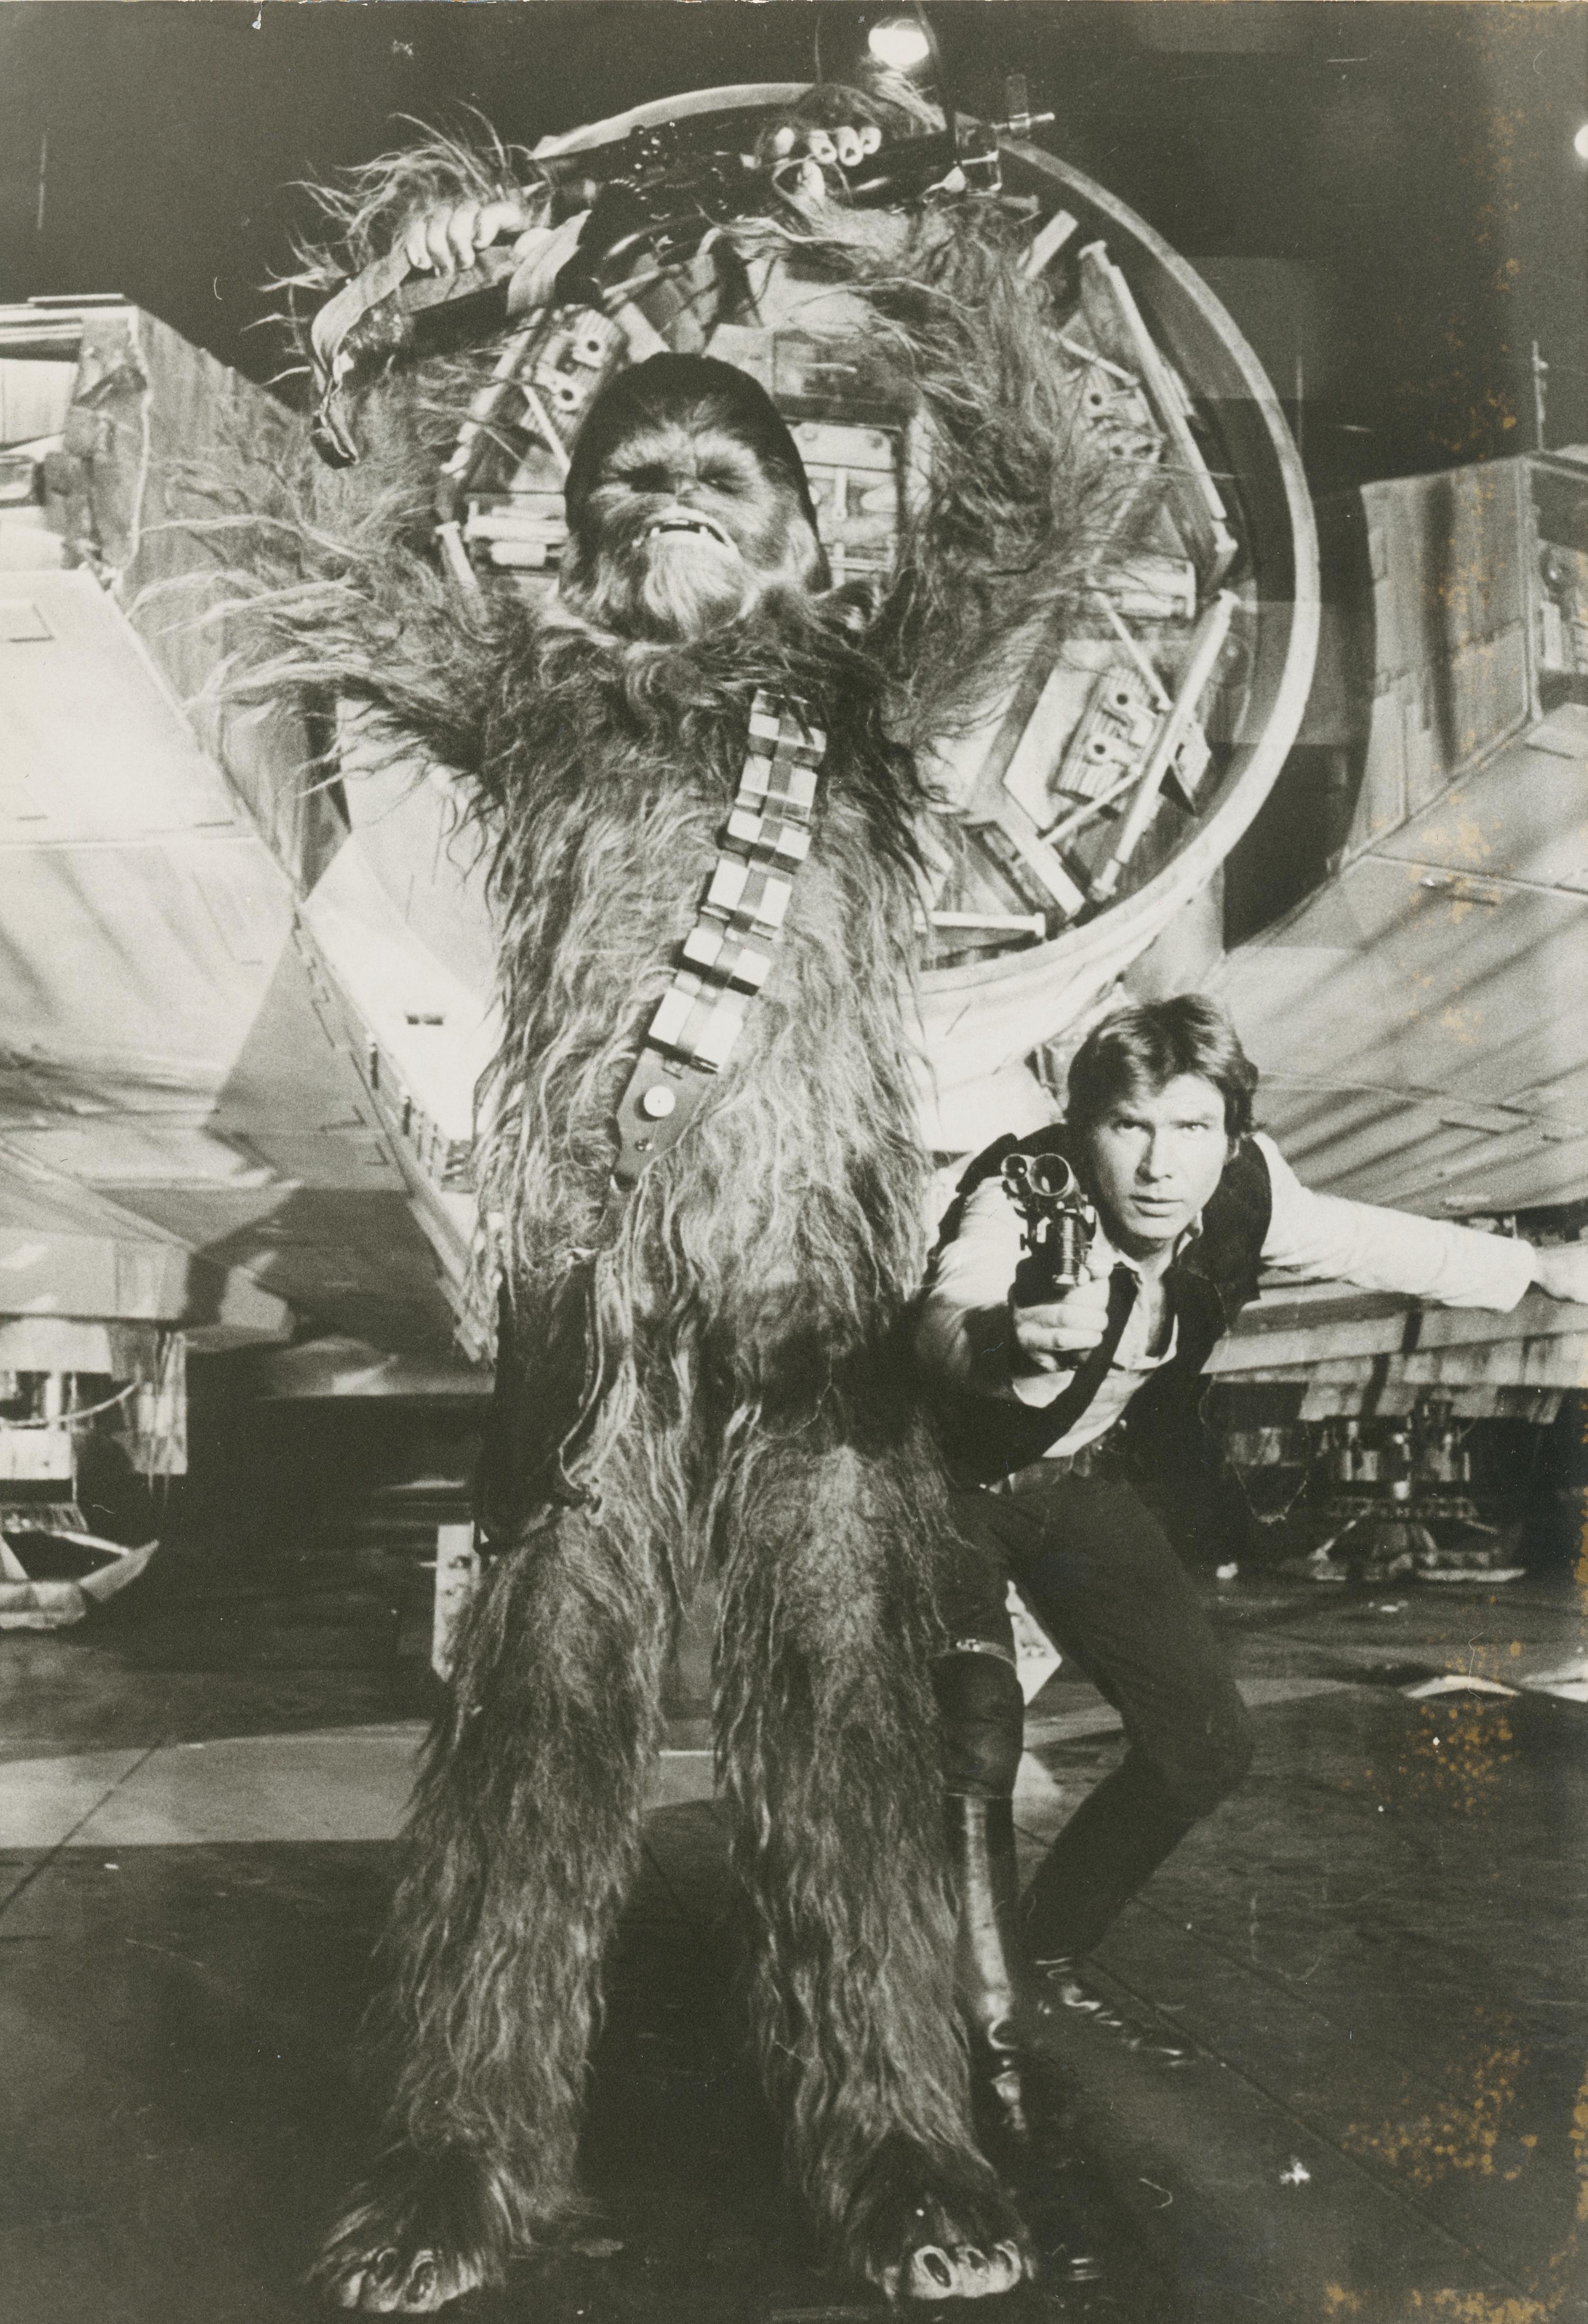 Unknown Black and White Photograph - Star Wars, Chewbacca and Luke, Sience Fiction Filmstill, 1977